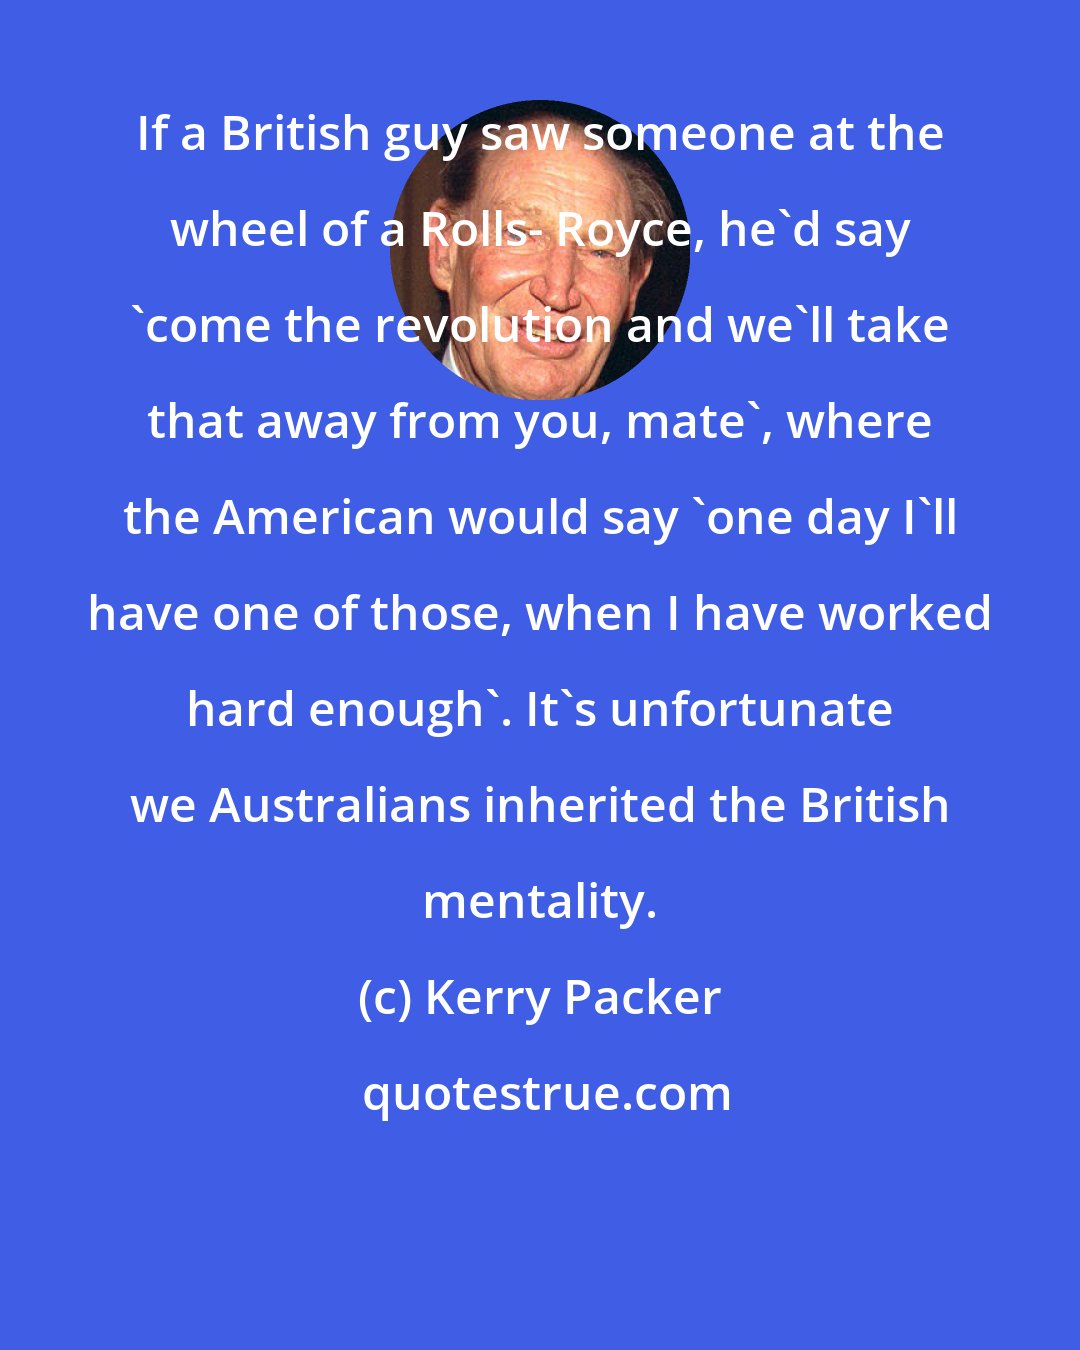 Kerry Packer: If a British guy saw someone at the wheel of a Rolls- Royce, he'd say 'come the revolution and we'll take that away from you, mate', where the American would say 'one day I'll have one of those, when I have worked hard enough'. It's unfortunate we Australians inherited the British mentality.